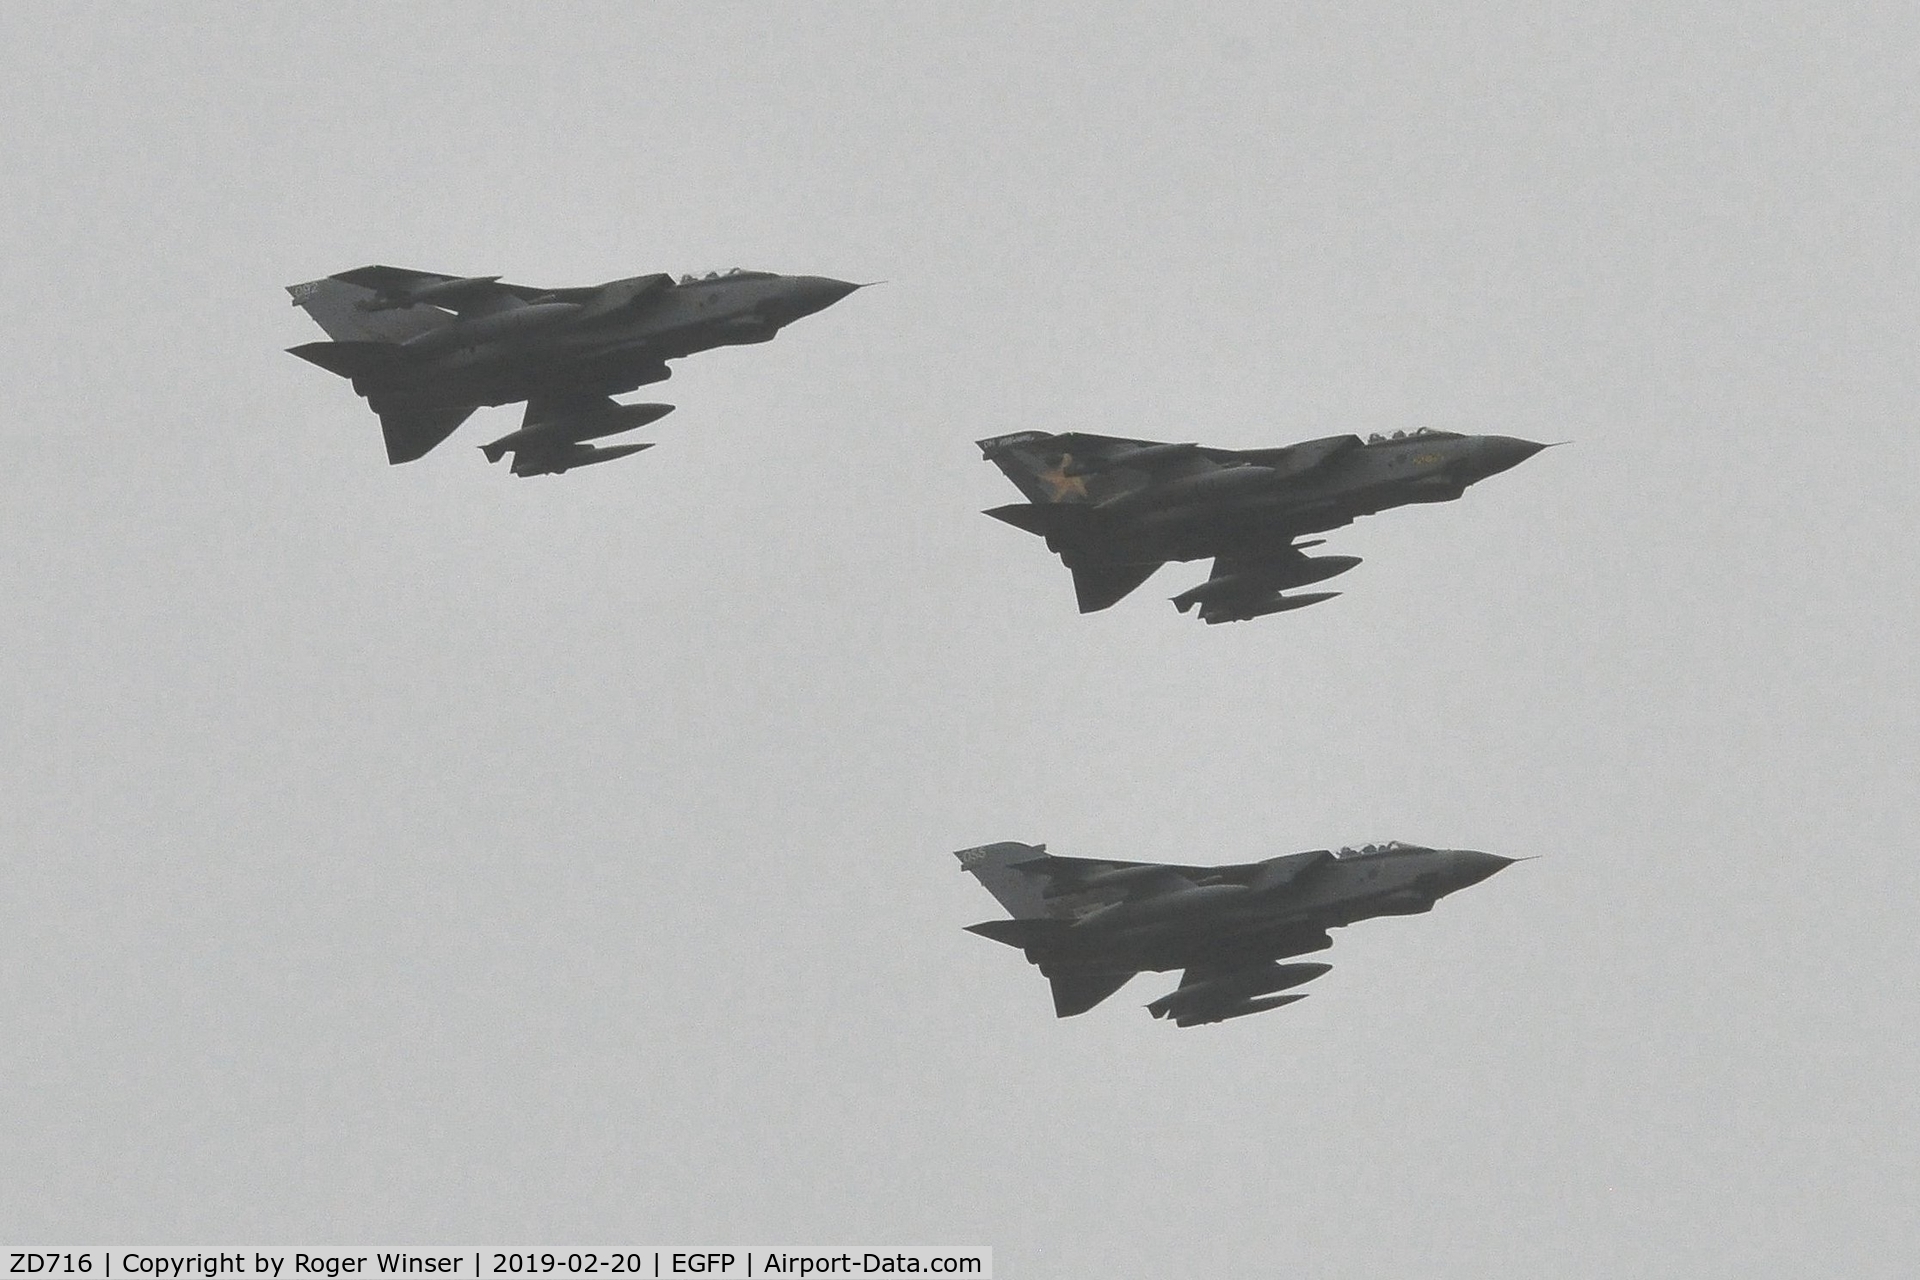 ZD716, 1984 Panavia Tornado GR.4 C/N 341/BS117/3157, ZD716/DH leading ZD744/092 and ZA587/055 during the RAF Tornado GR.4 farewell tour of Southern Britain.